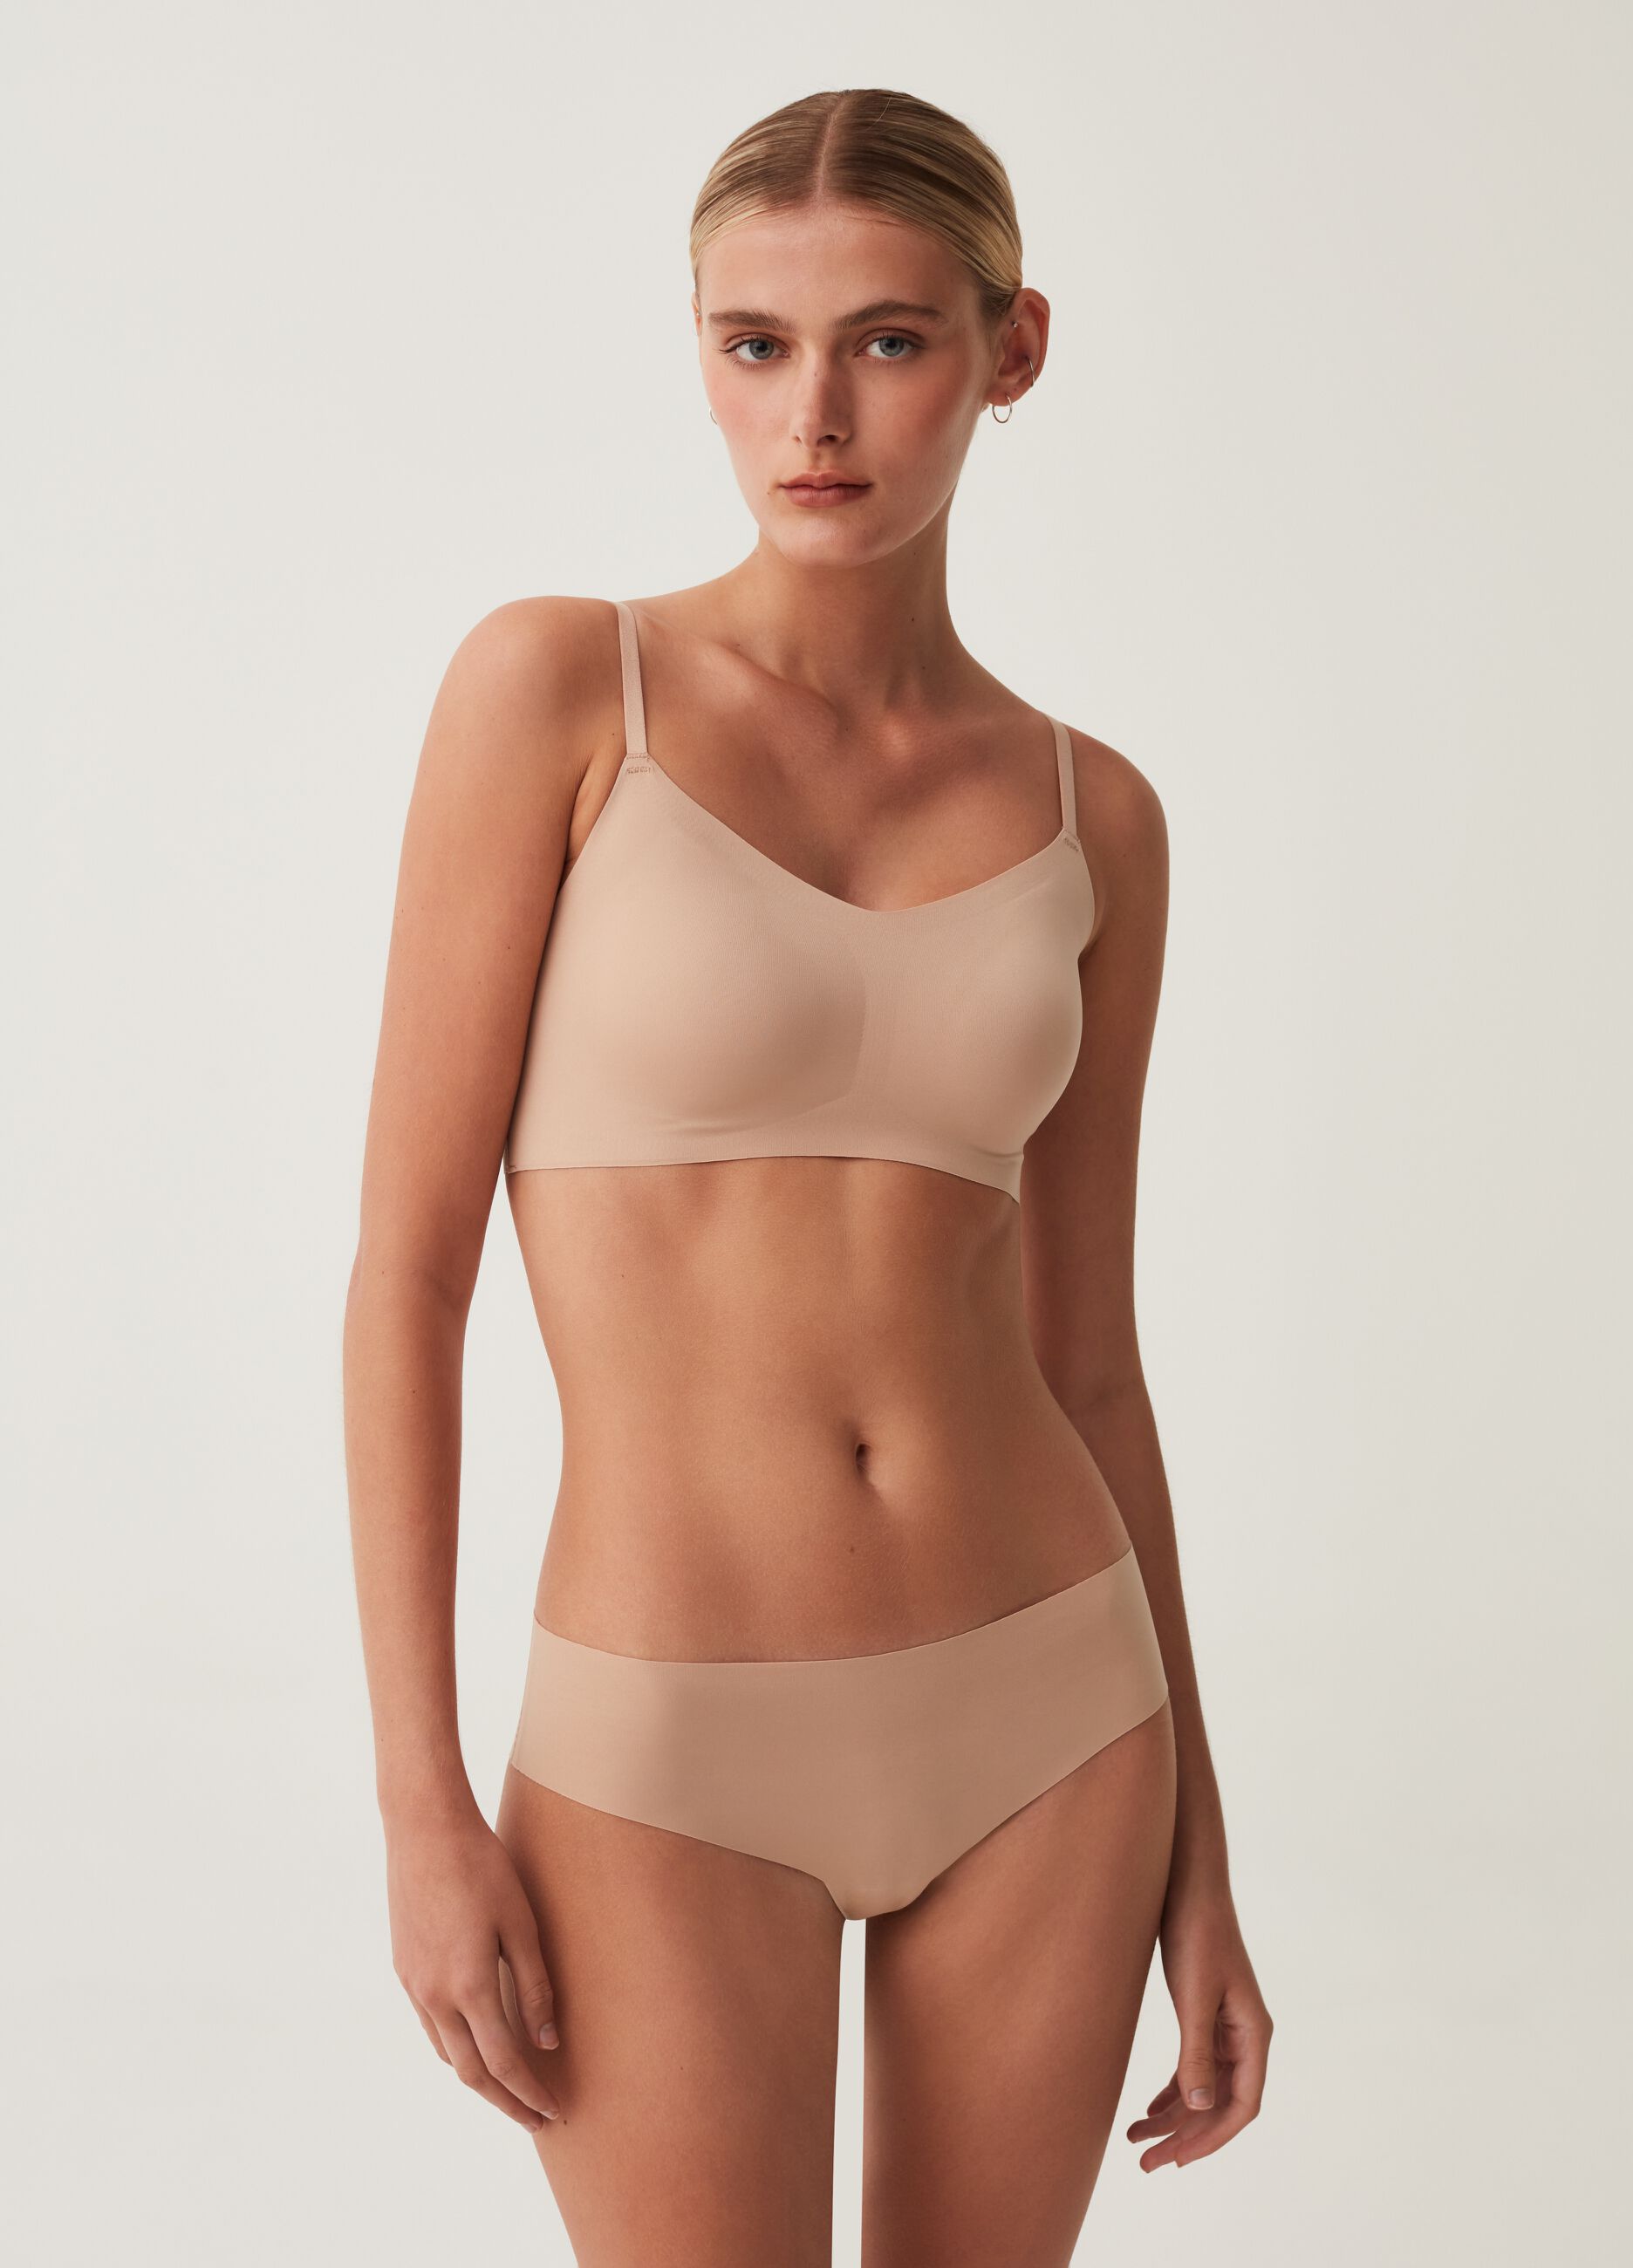 The Nude Effect bralette